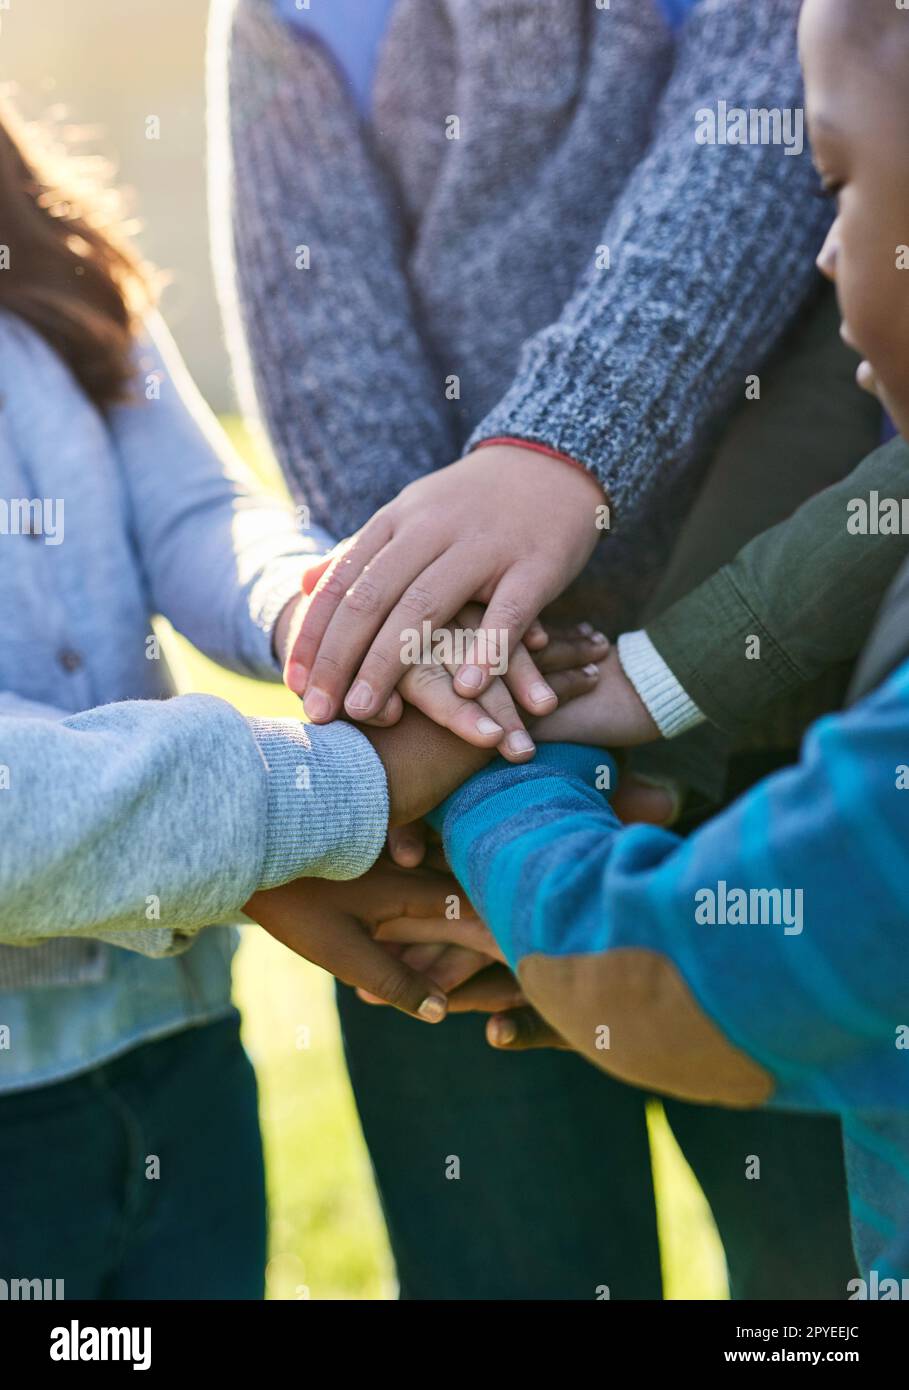 Uniting young minds. a group of unrecognizable elementary school kids joining their hands together in a huddle outside. Stock Photo